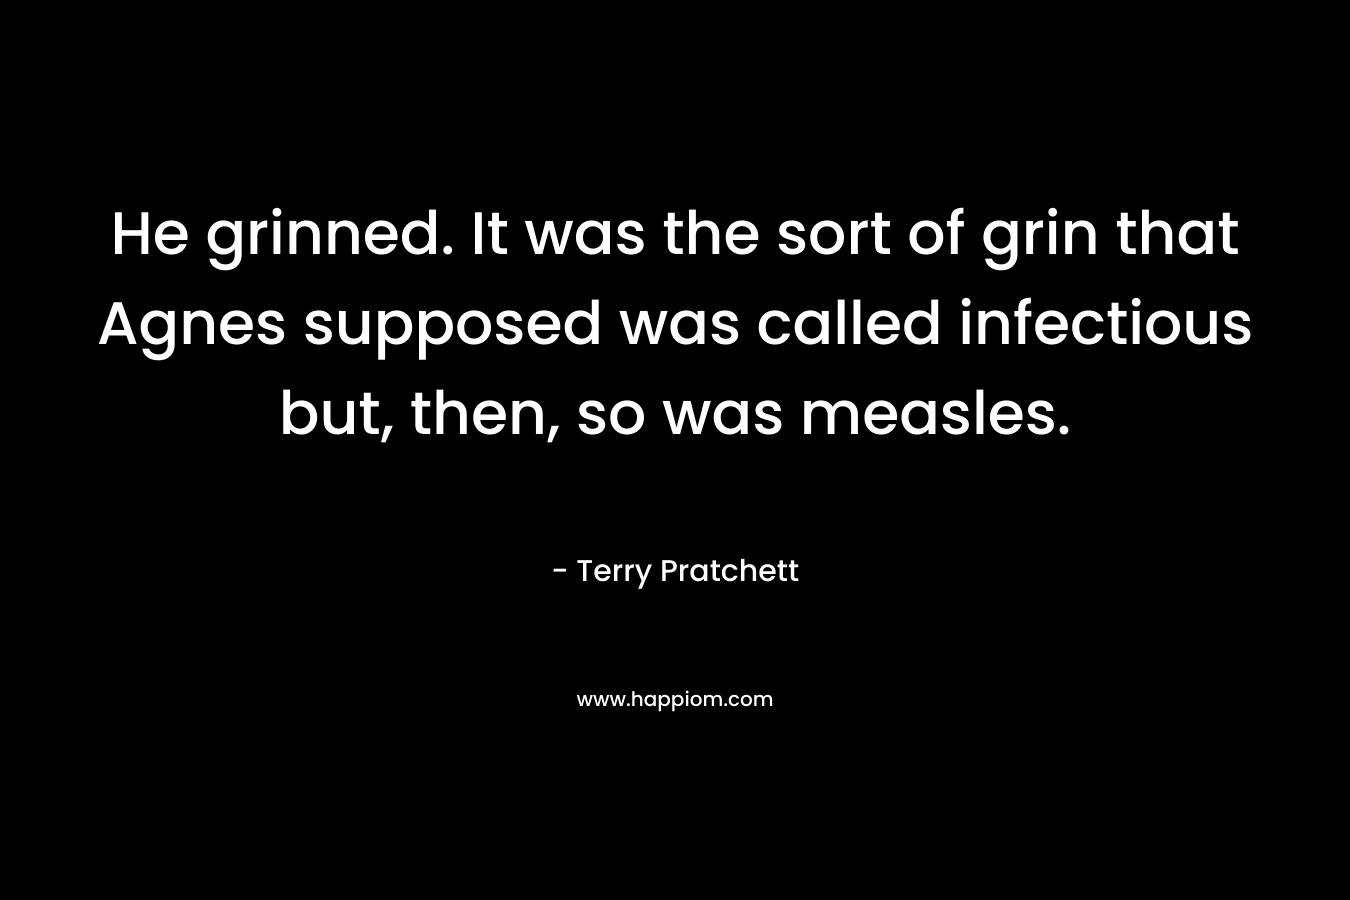 He grinned. It was the sort of grin that Agnes supposed was called infectious but, then, so was measles. – Terry Pratchett